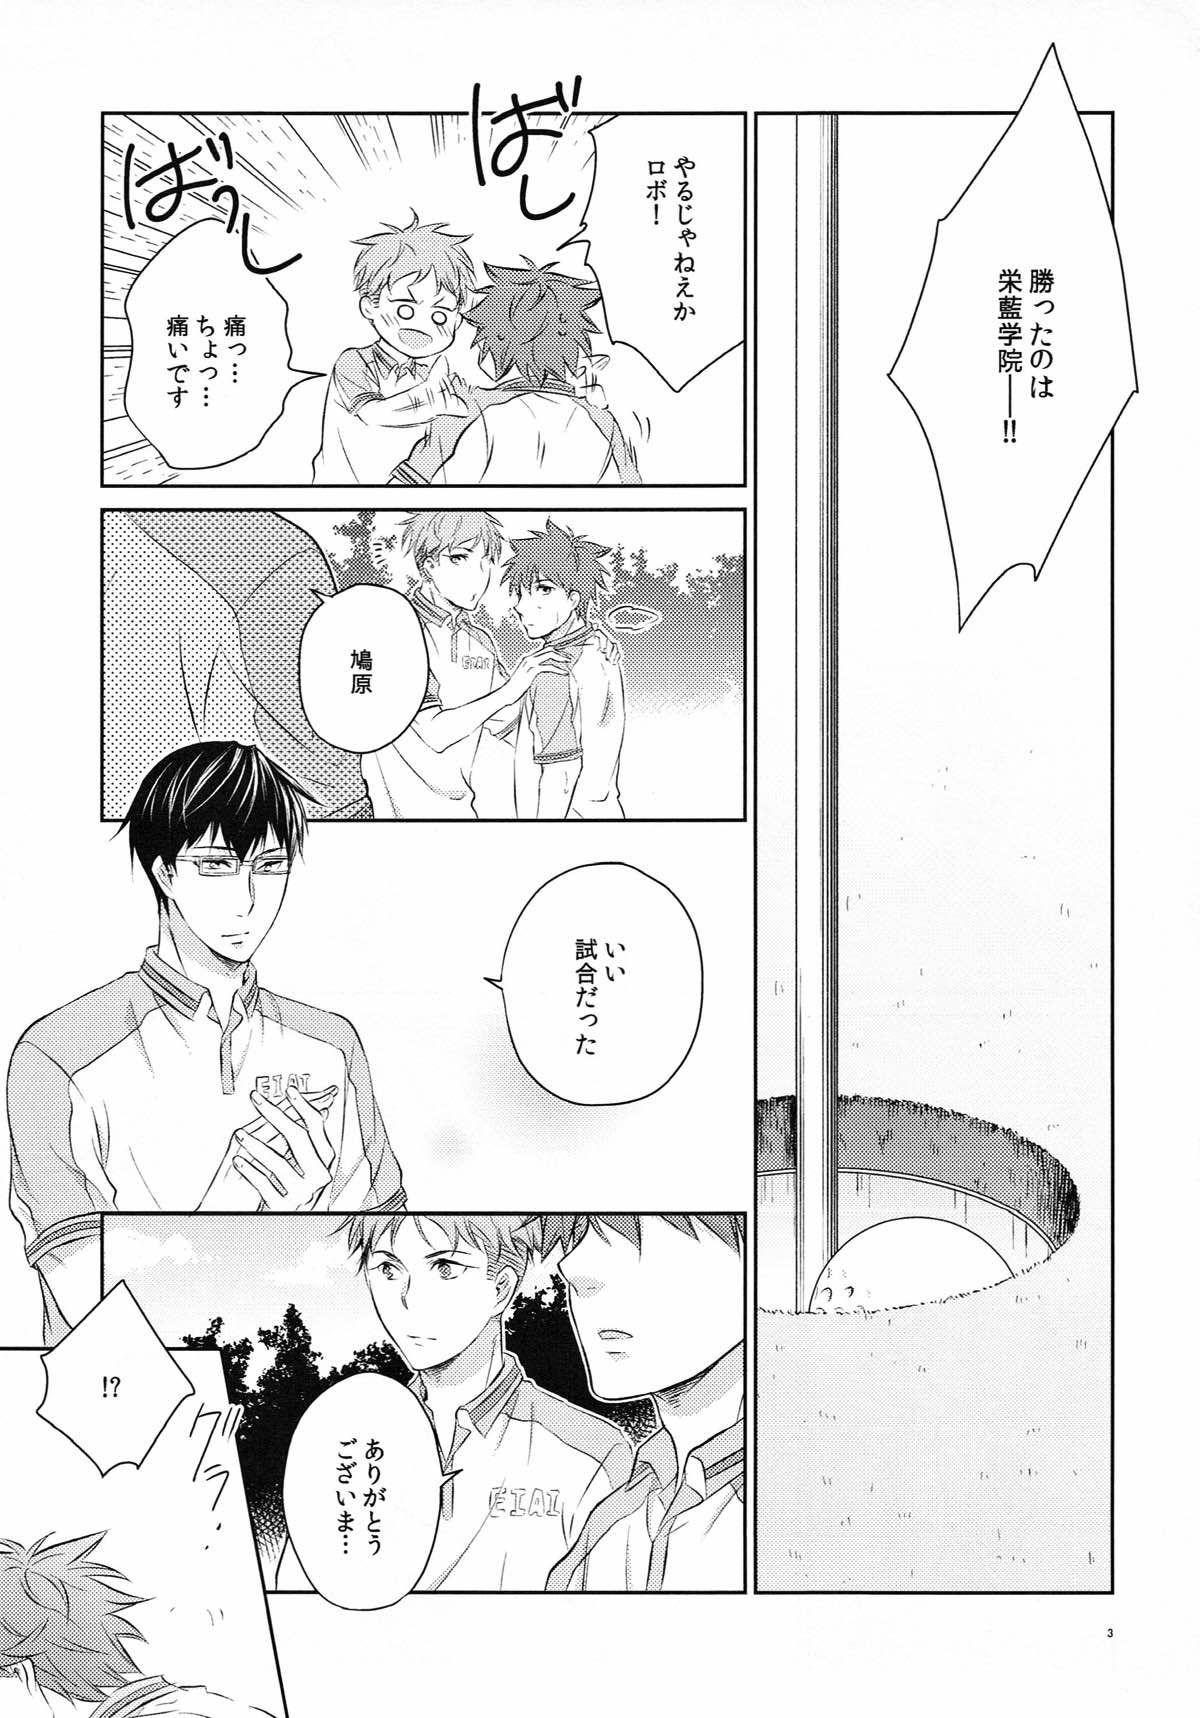 Red Head (C93) [Village (Sonmin)] merry-go-round (ROBOT×LASERBEAM) - Original Sister - Page 2